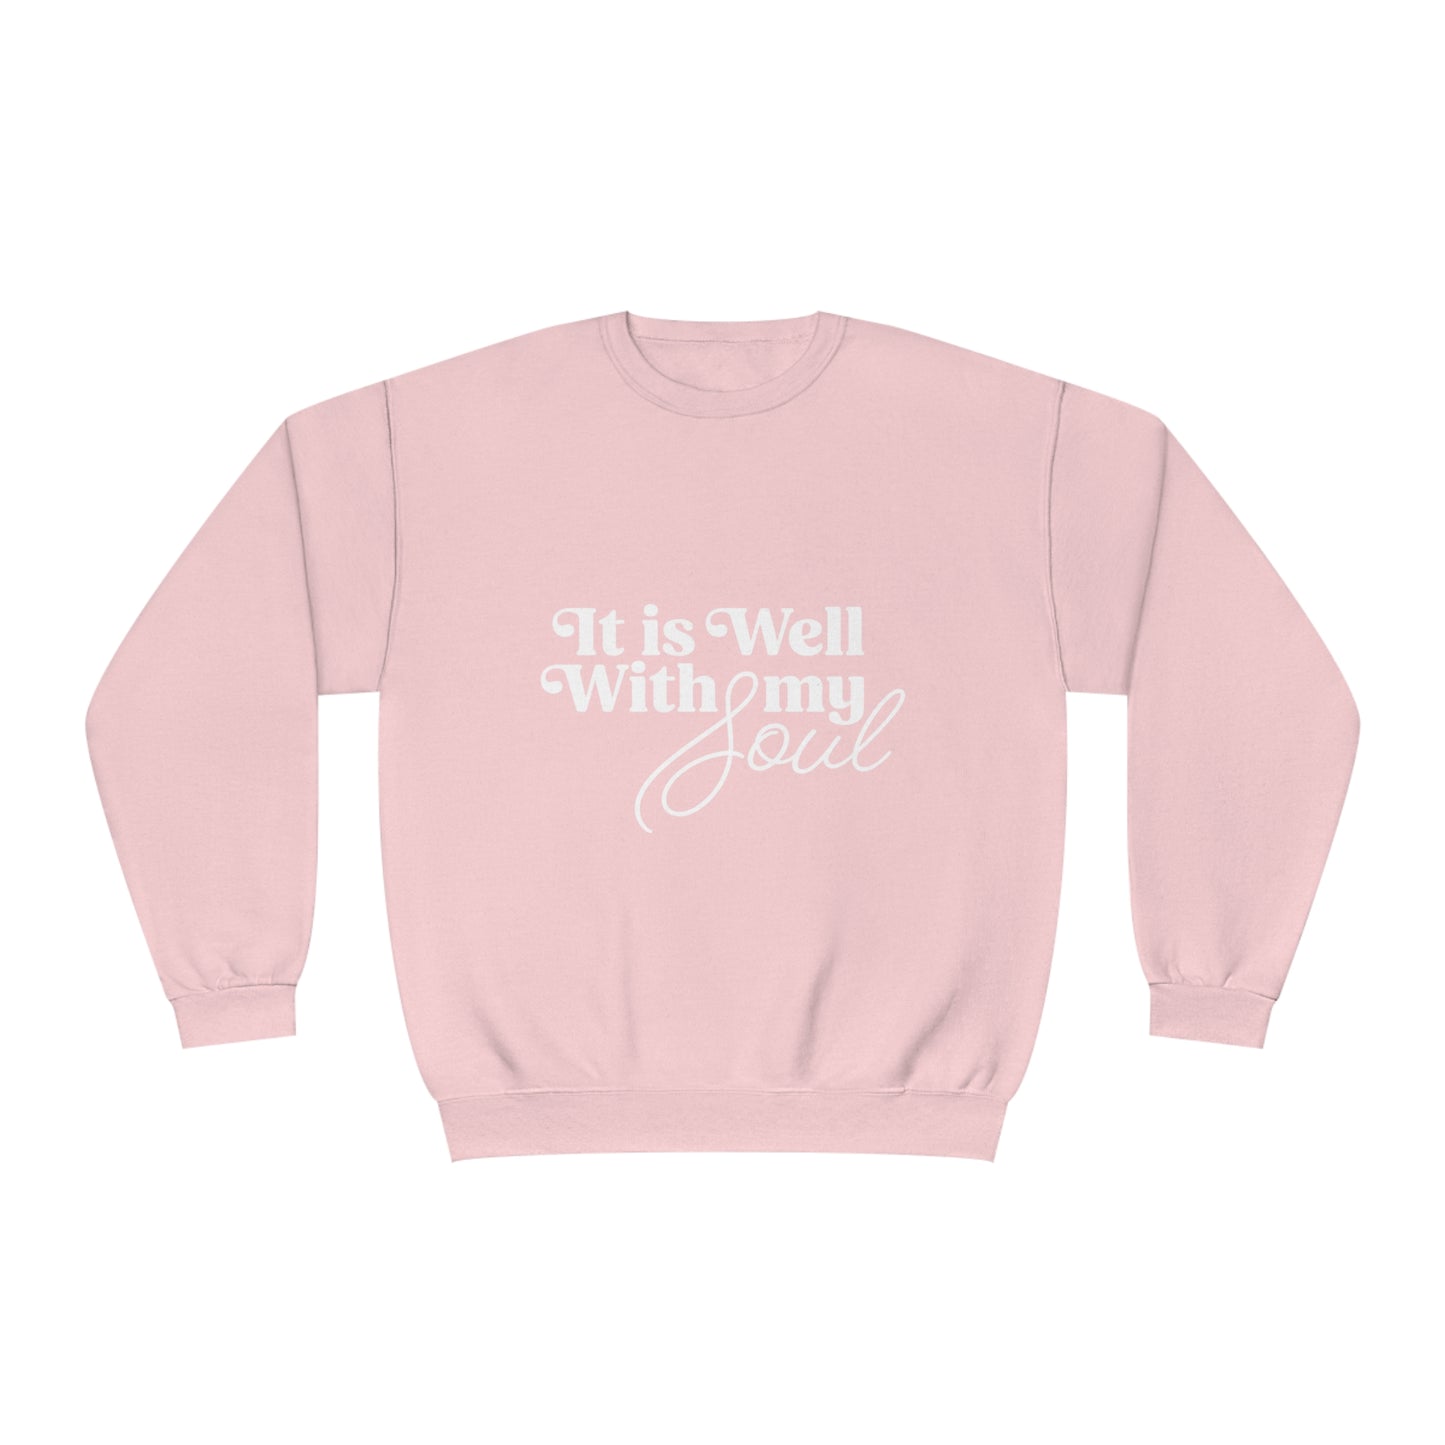 Well With my Soul Sweatshirt - A